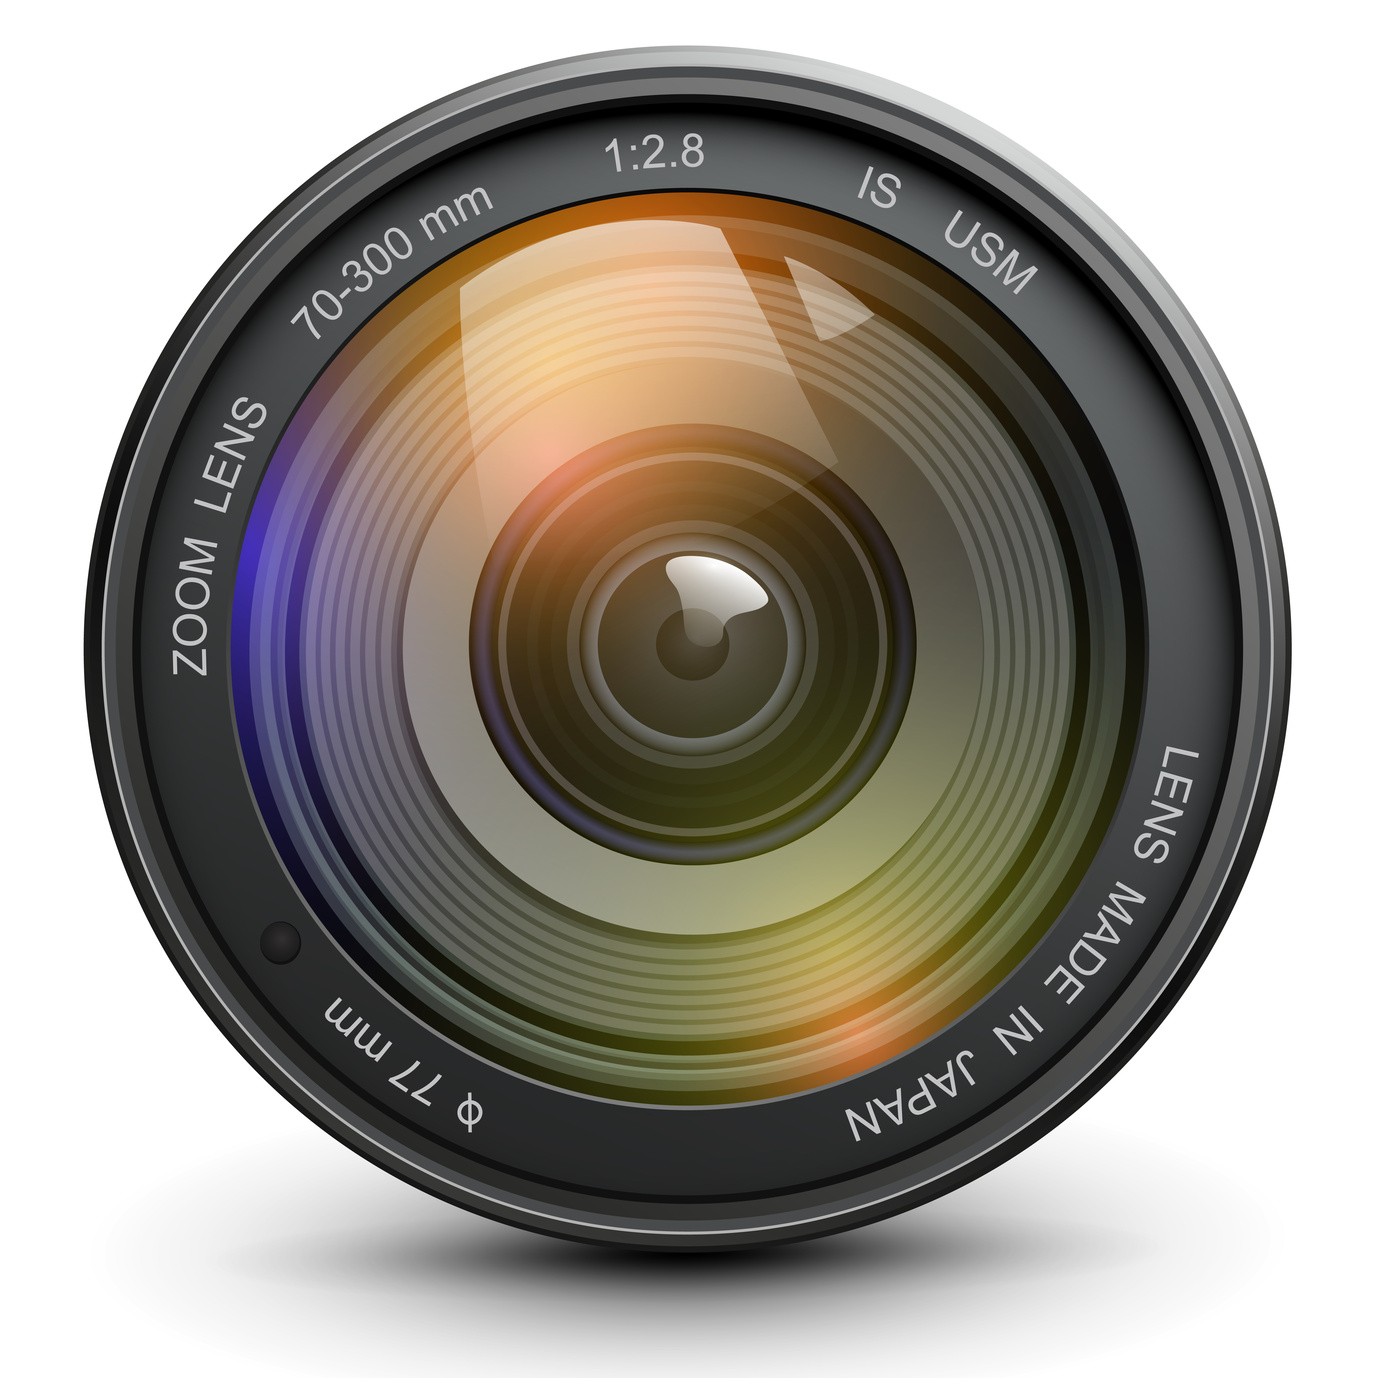 Image gallery for : photography camera lens png